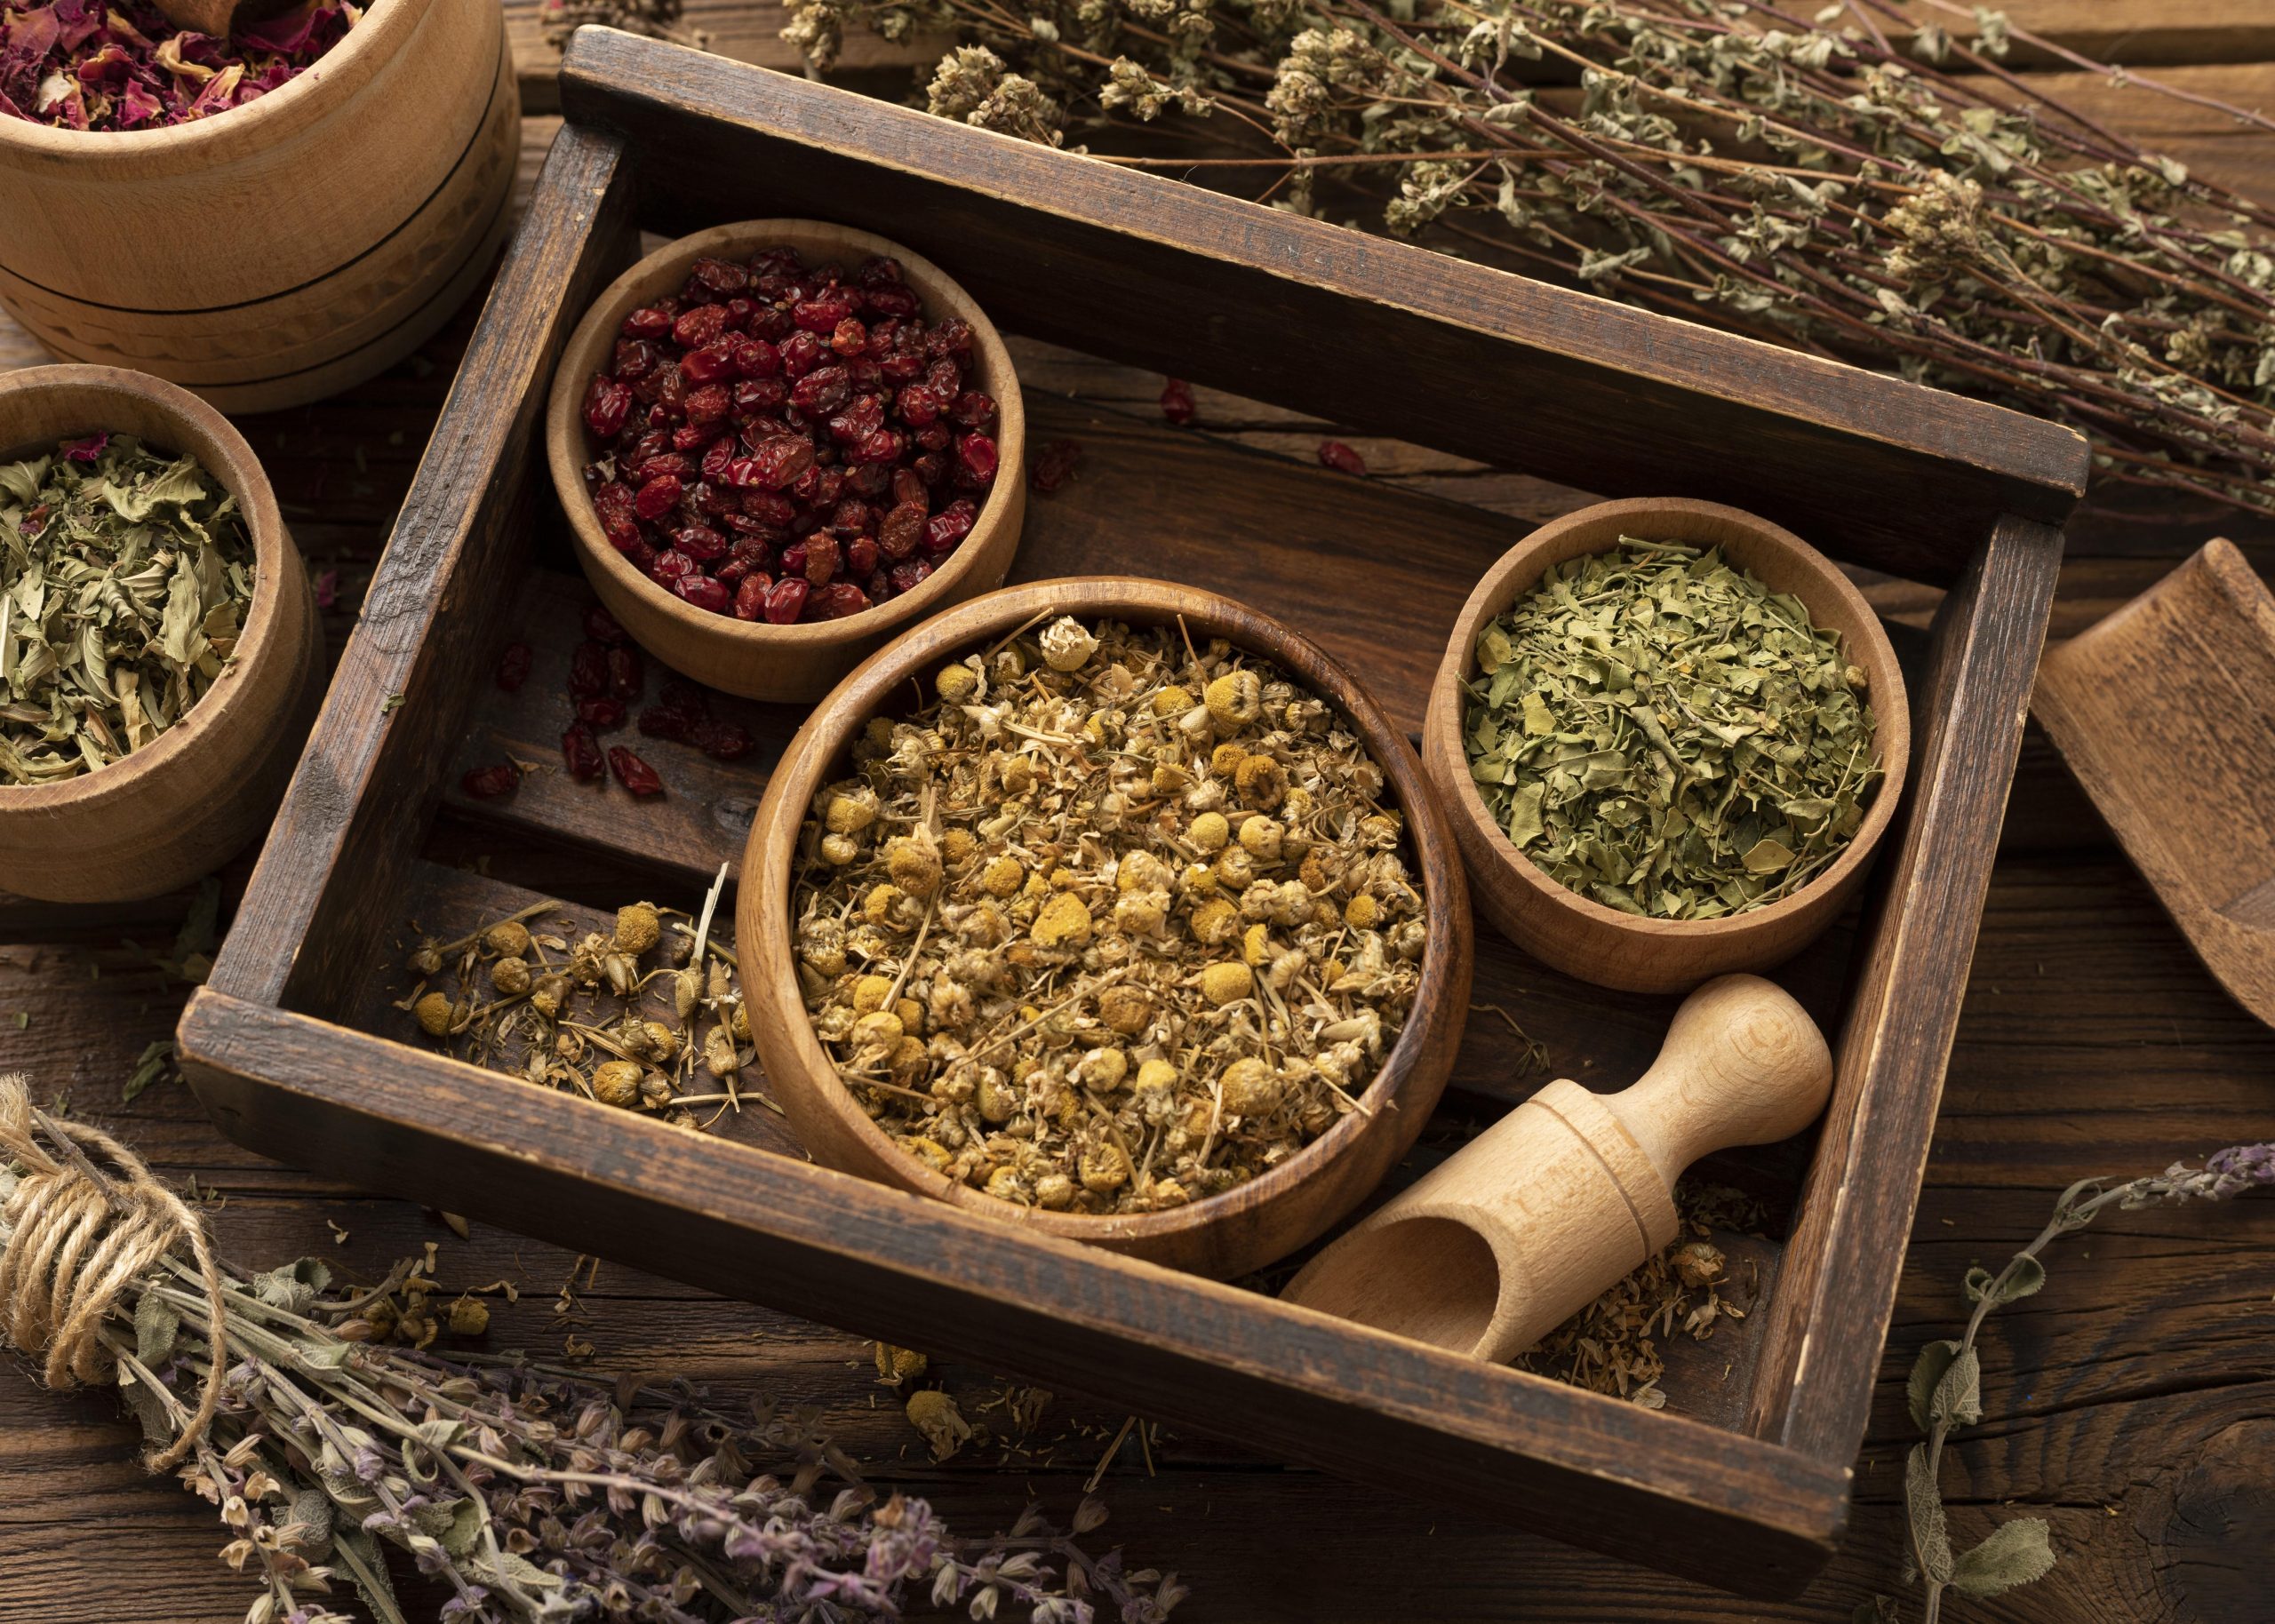 Integrating Herbal Remedies into Your Everyday Life with Apothecary